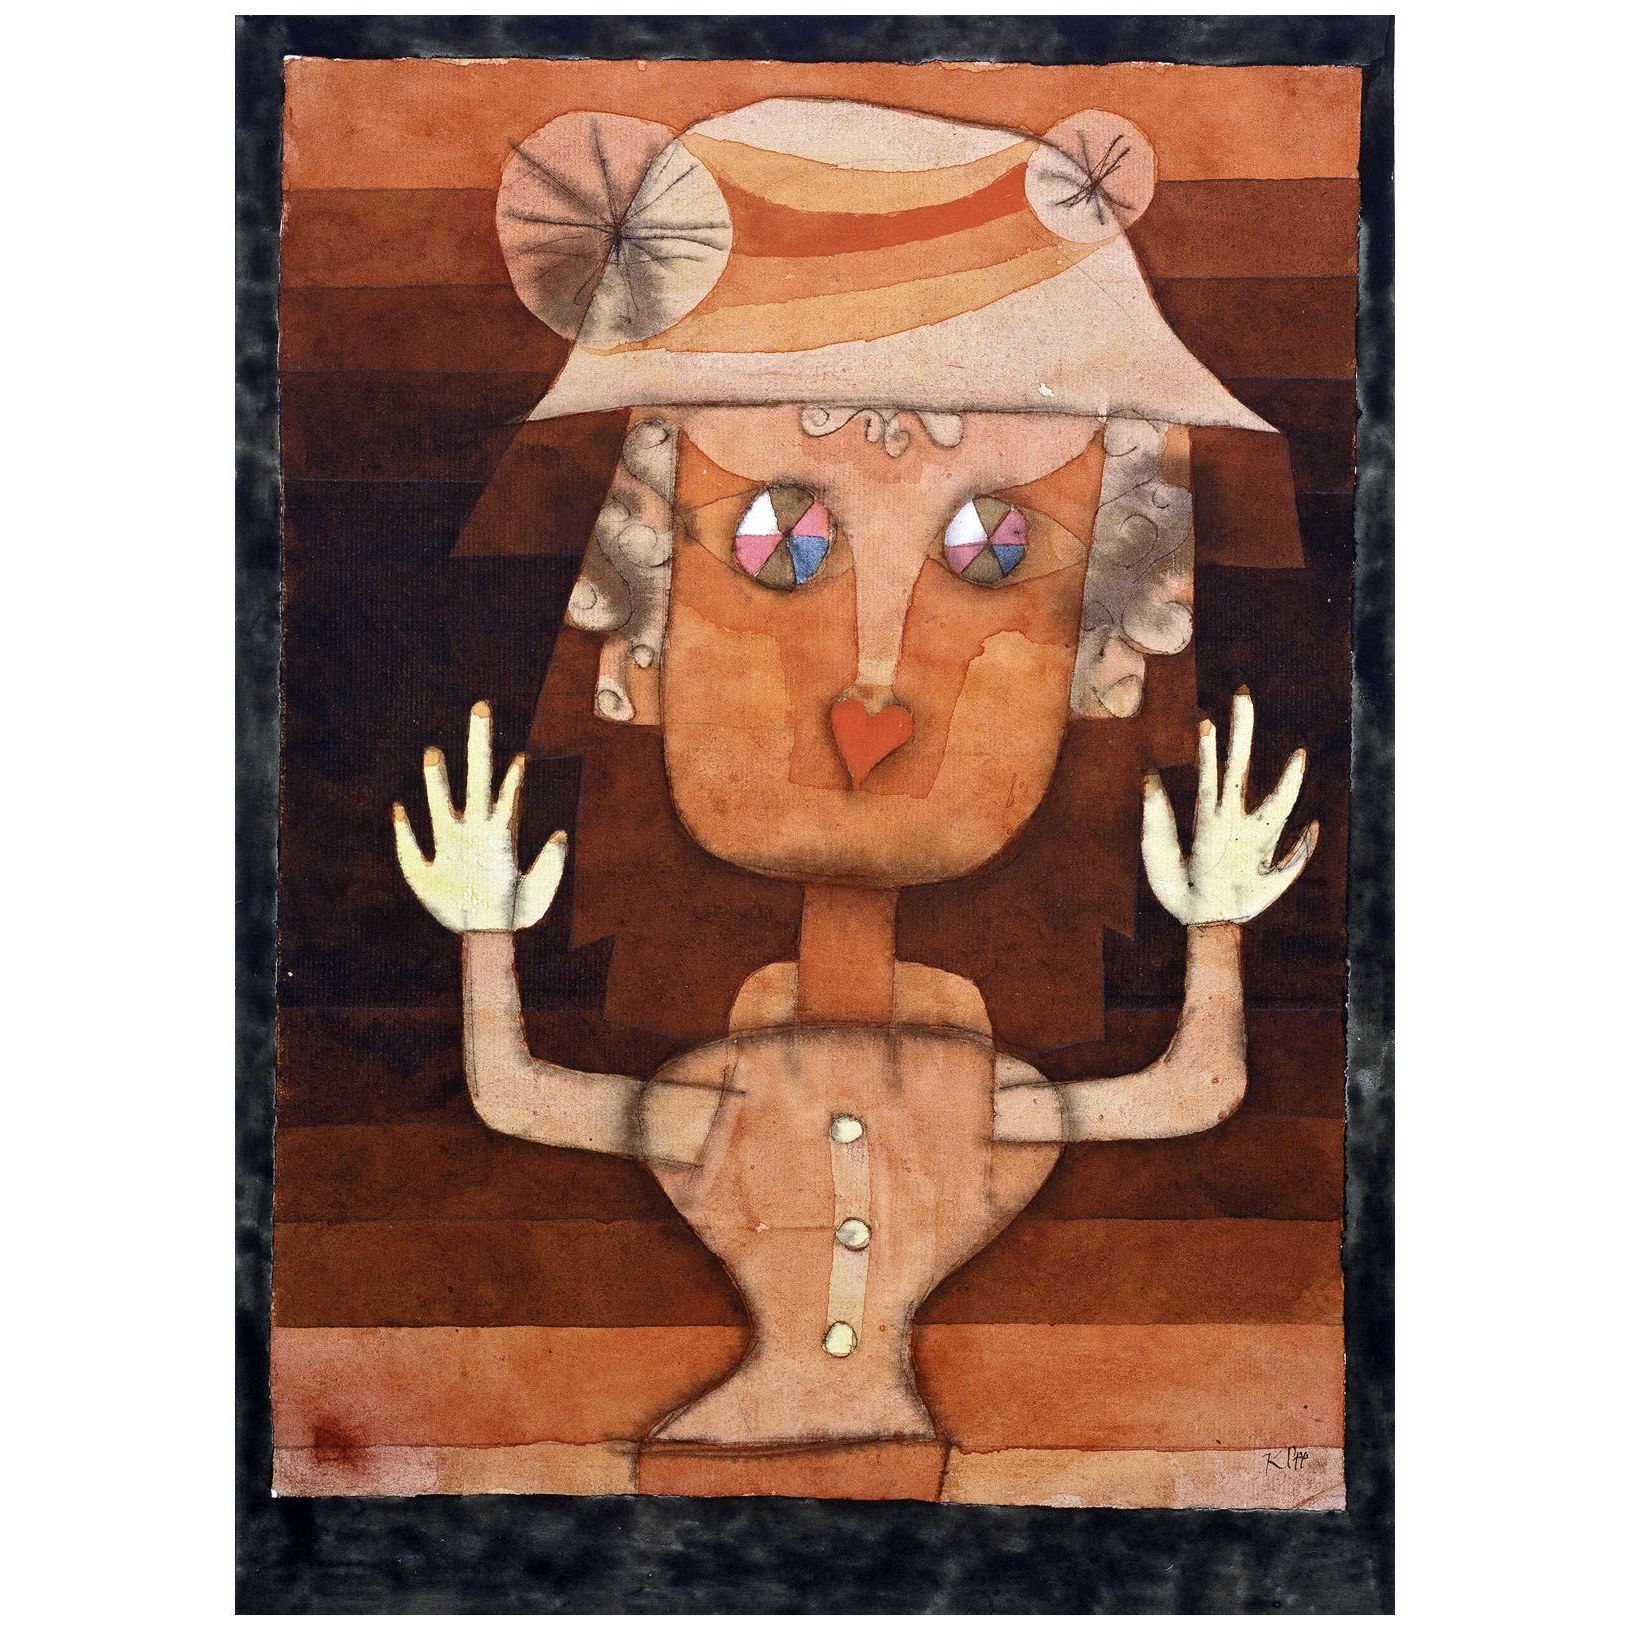 Paul Klee. Puppet. 1923. Pushkin Museum Moscow